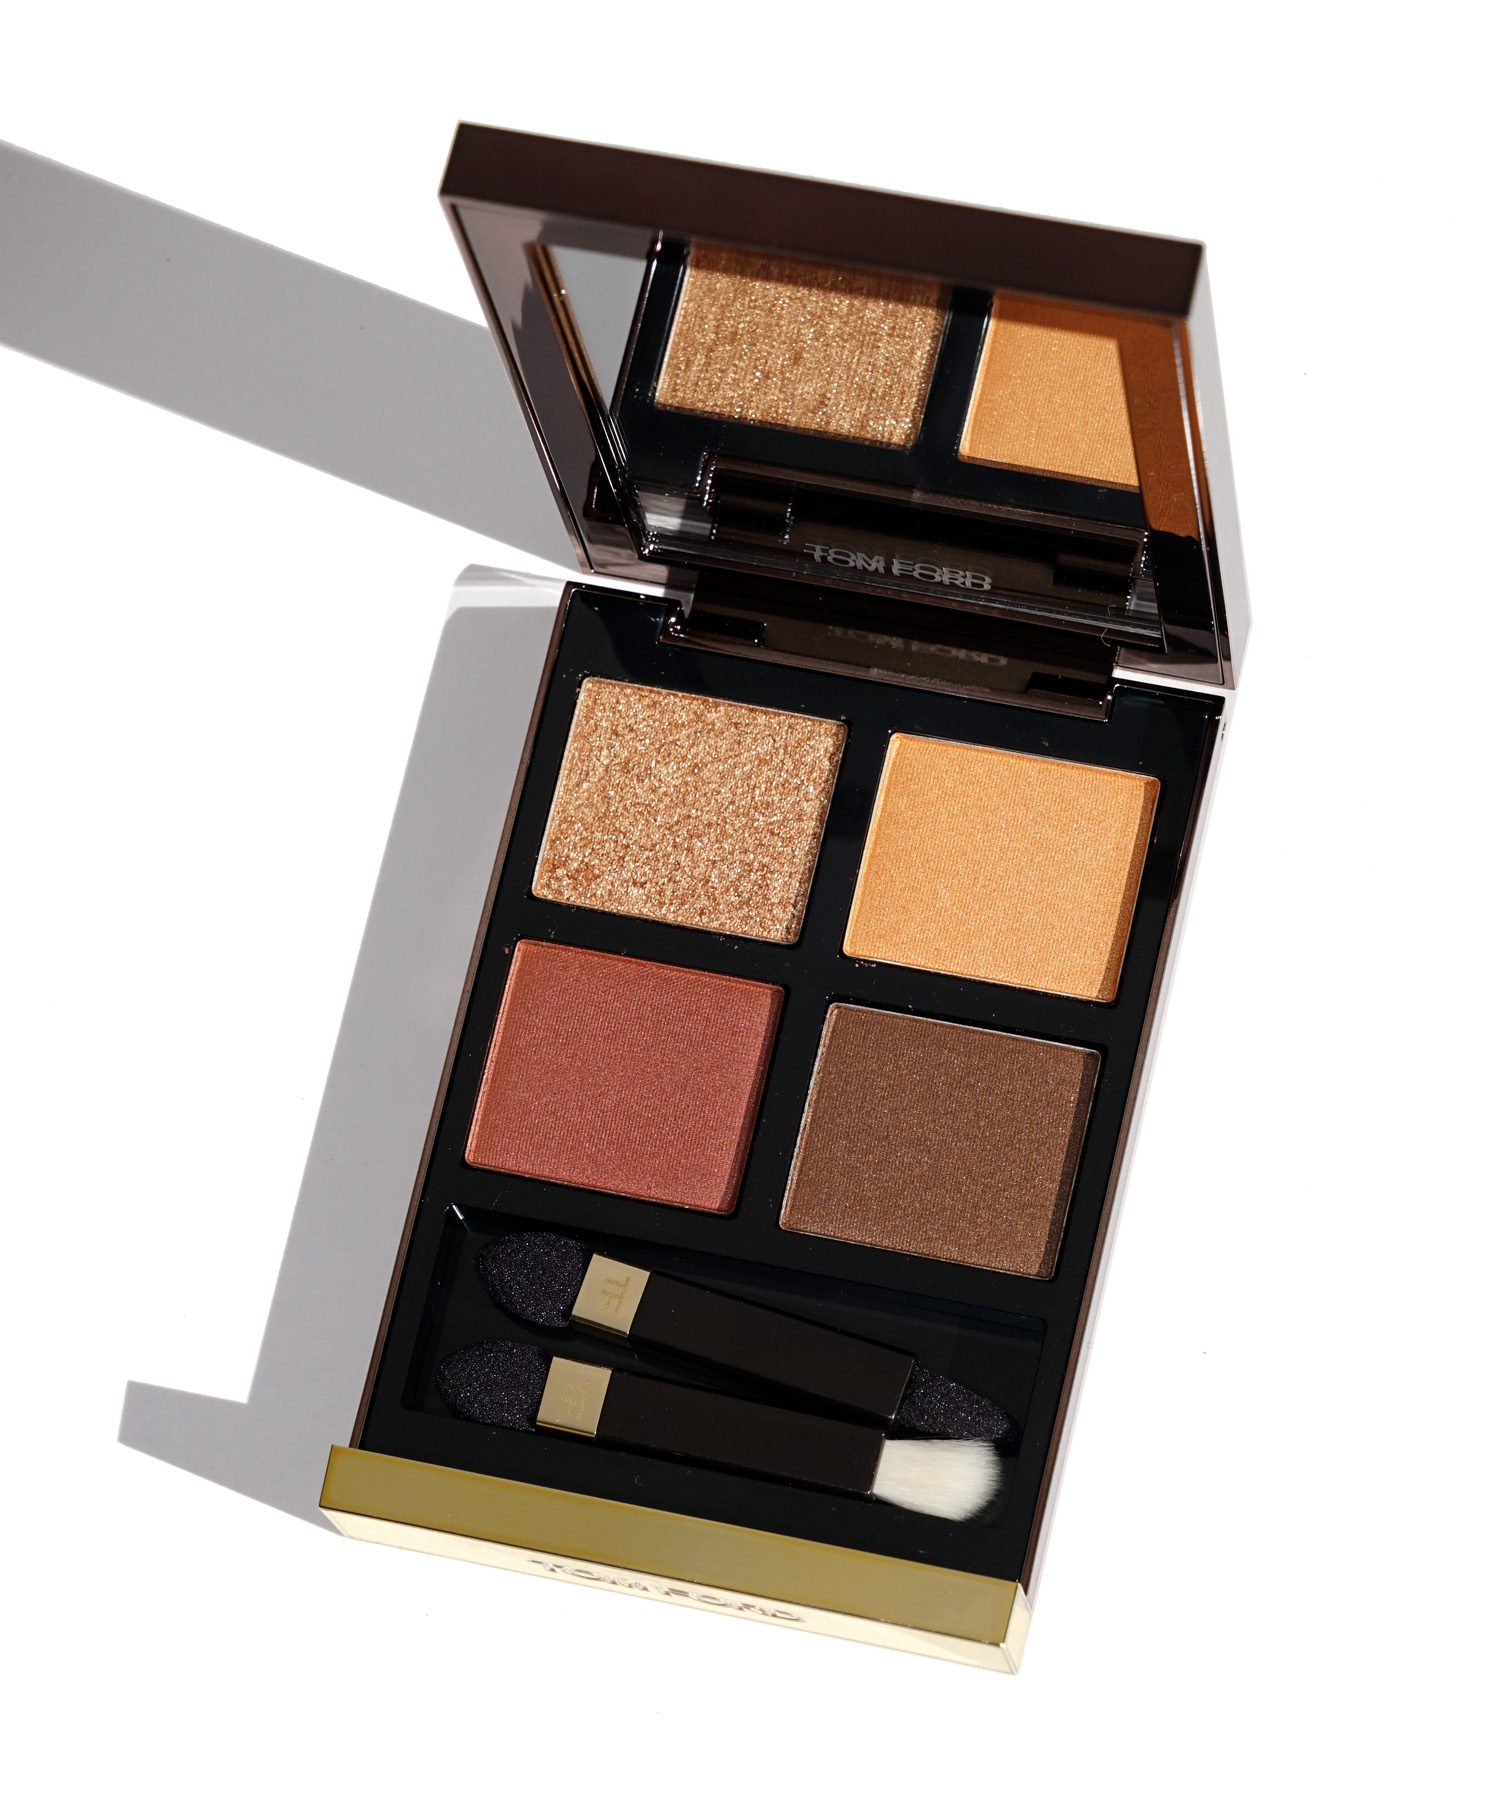 Tom Ford Eye Color Quads New Shades Review + Swatches - The Beauty 